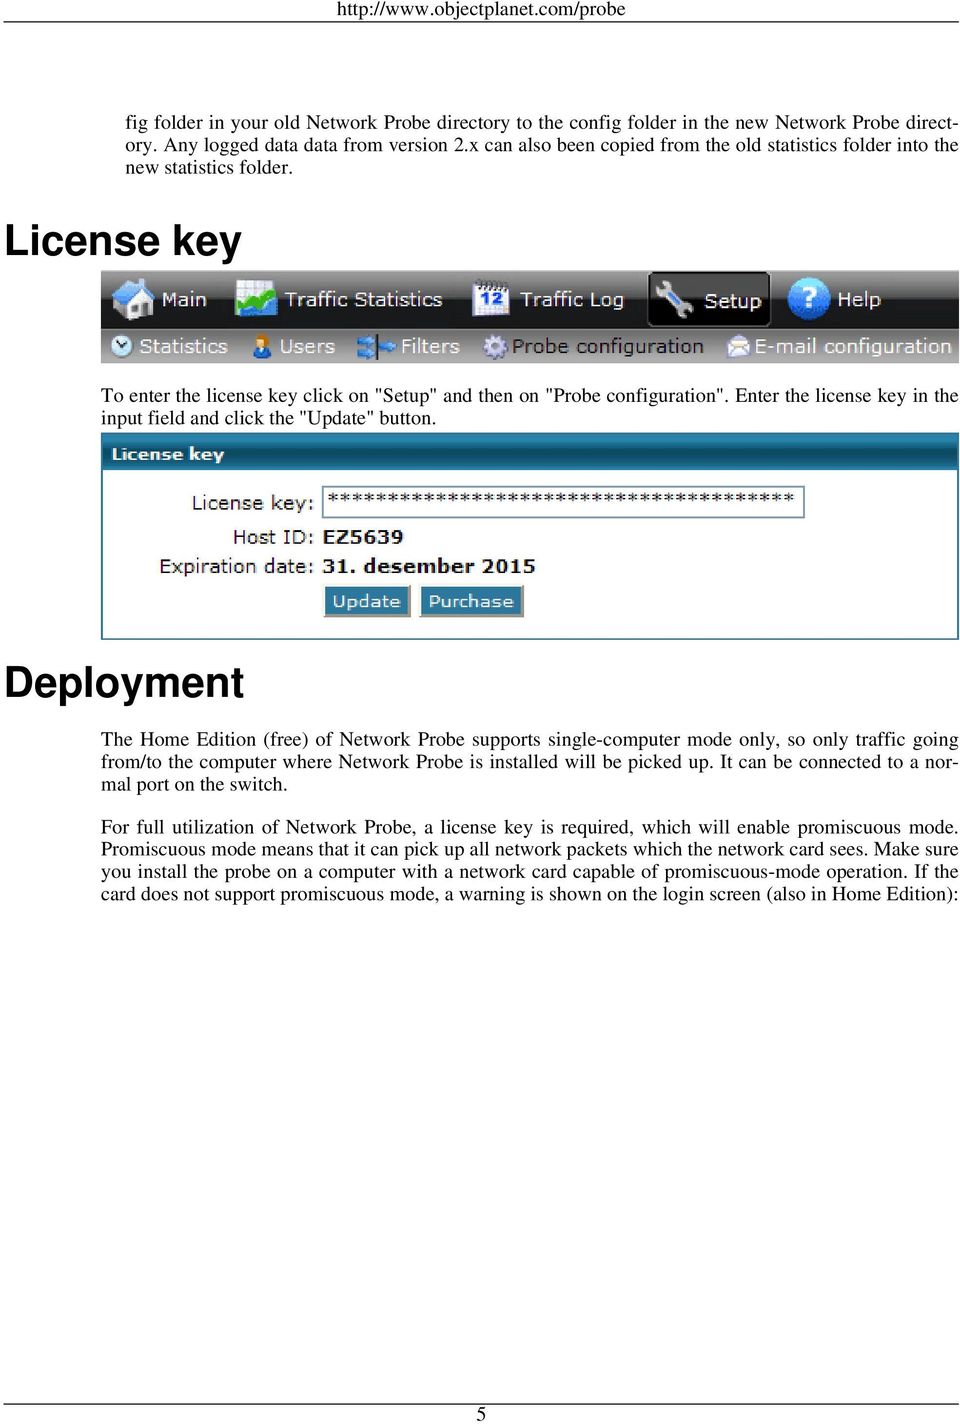 Enter the license key in the input field and click the "Update" button.